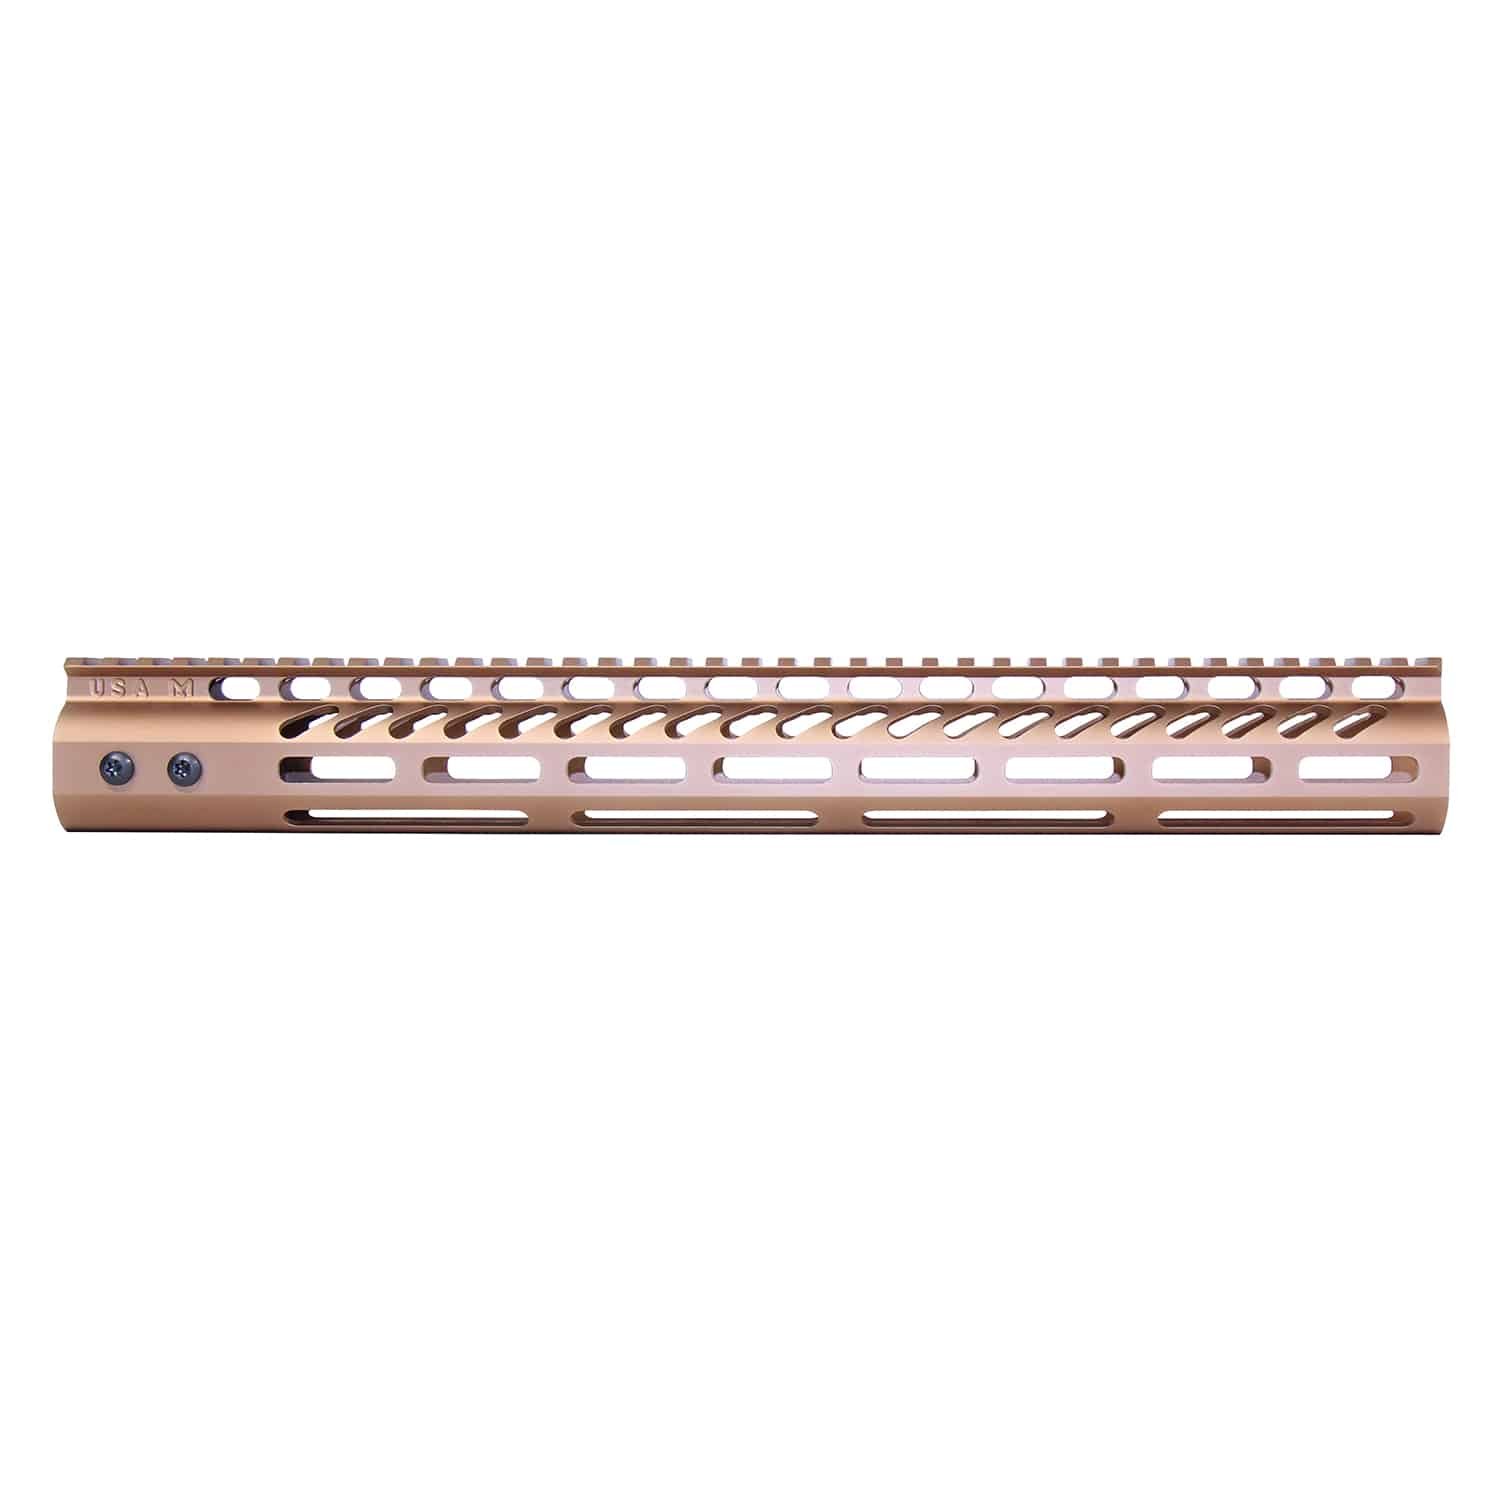 15" Ultra Lightweight Thin M-LOK System Free Floating Handguard With Monolithic Top Rail (Anodized Bronze)